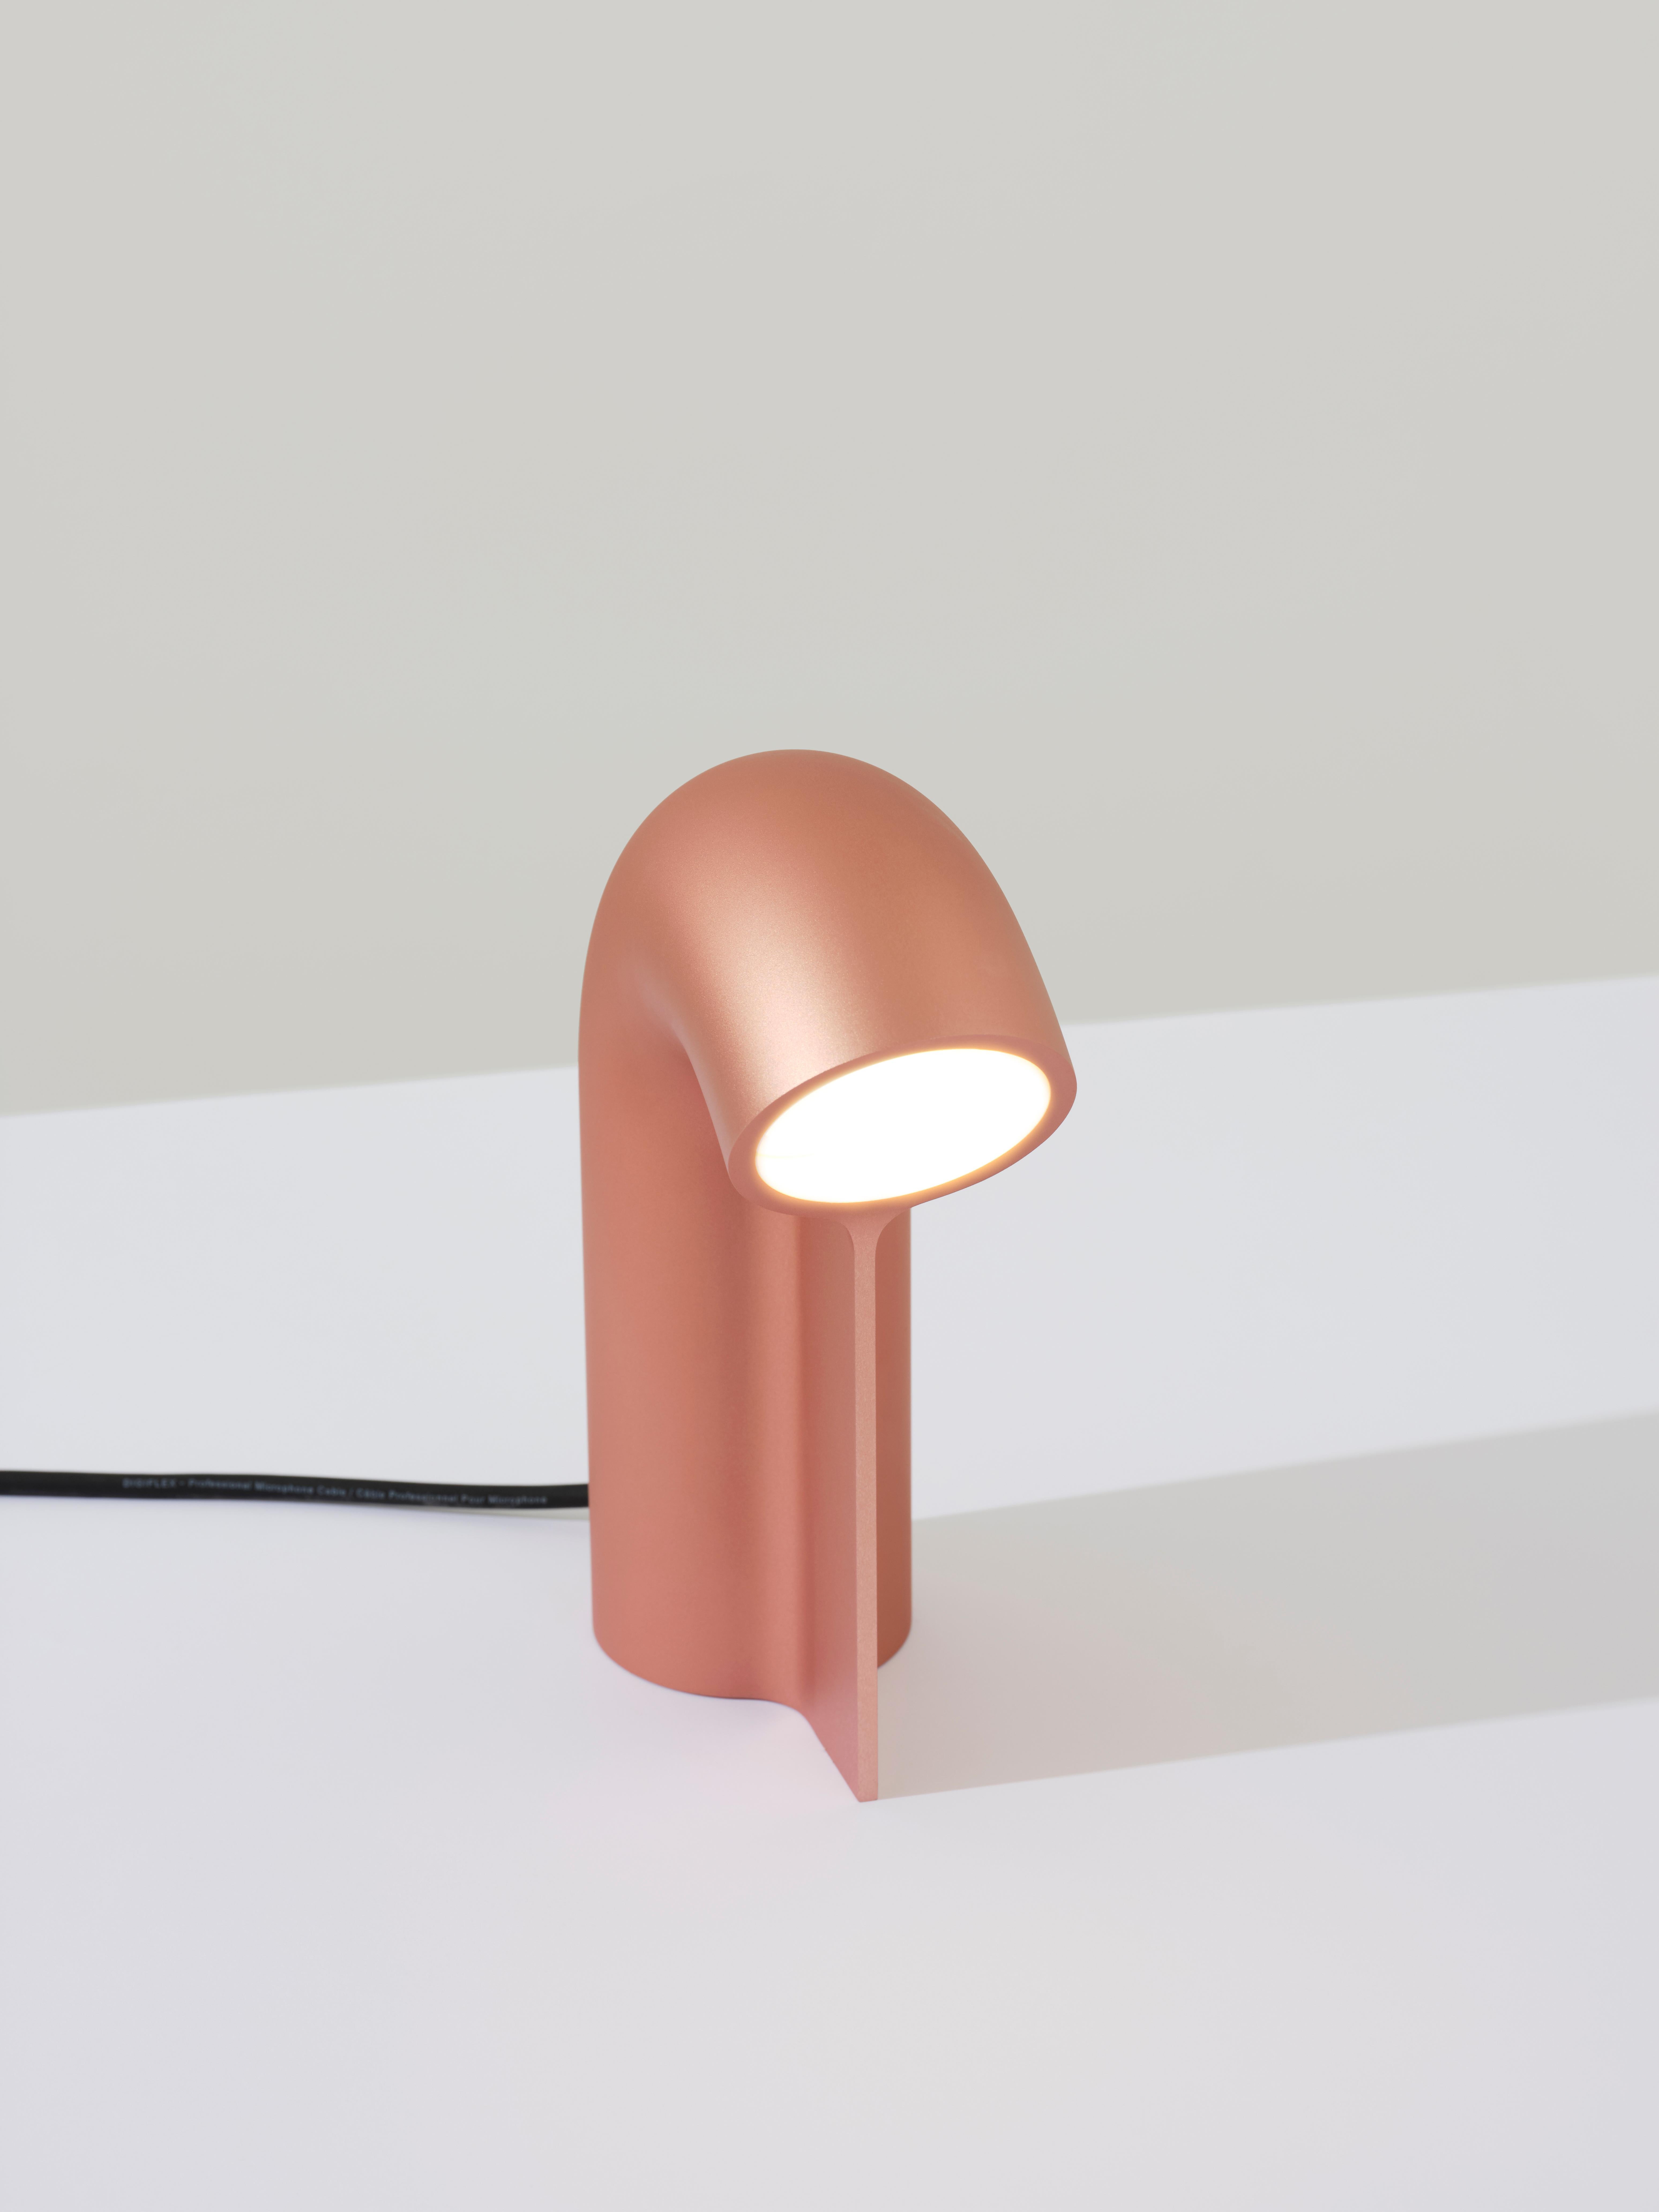 The Stutter Lamp is milled from a solid block of aluminum using a 5-axis milling machine. Its shape mimics having been cut from a larger object with tactility premier in its creation. 

Emitting a downward warm glow, the Stutter Lamp is a perfect